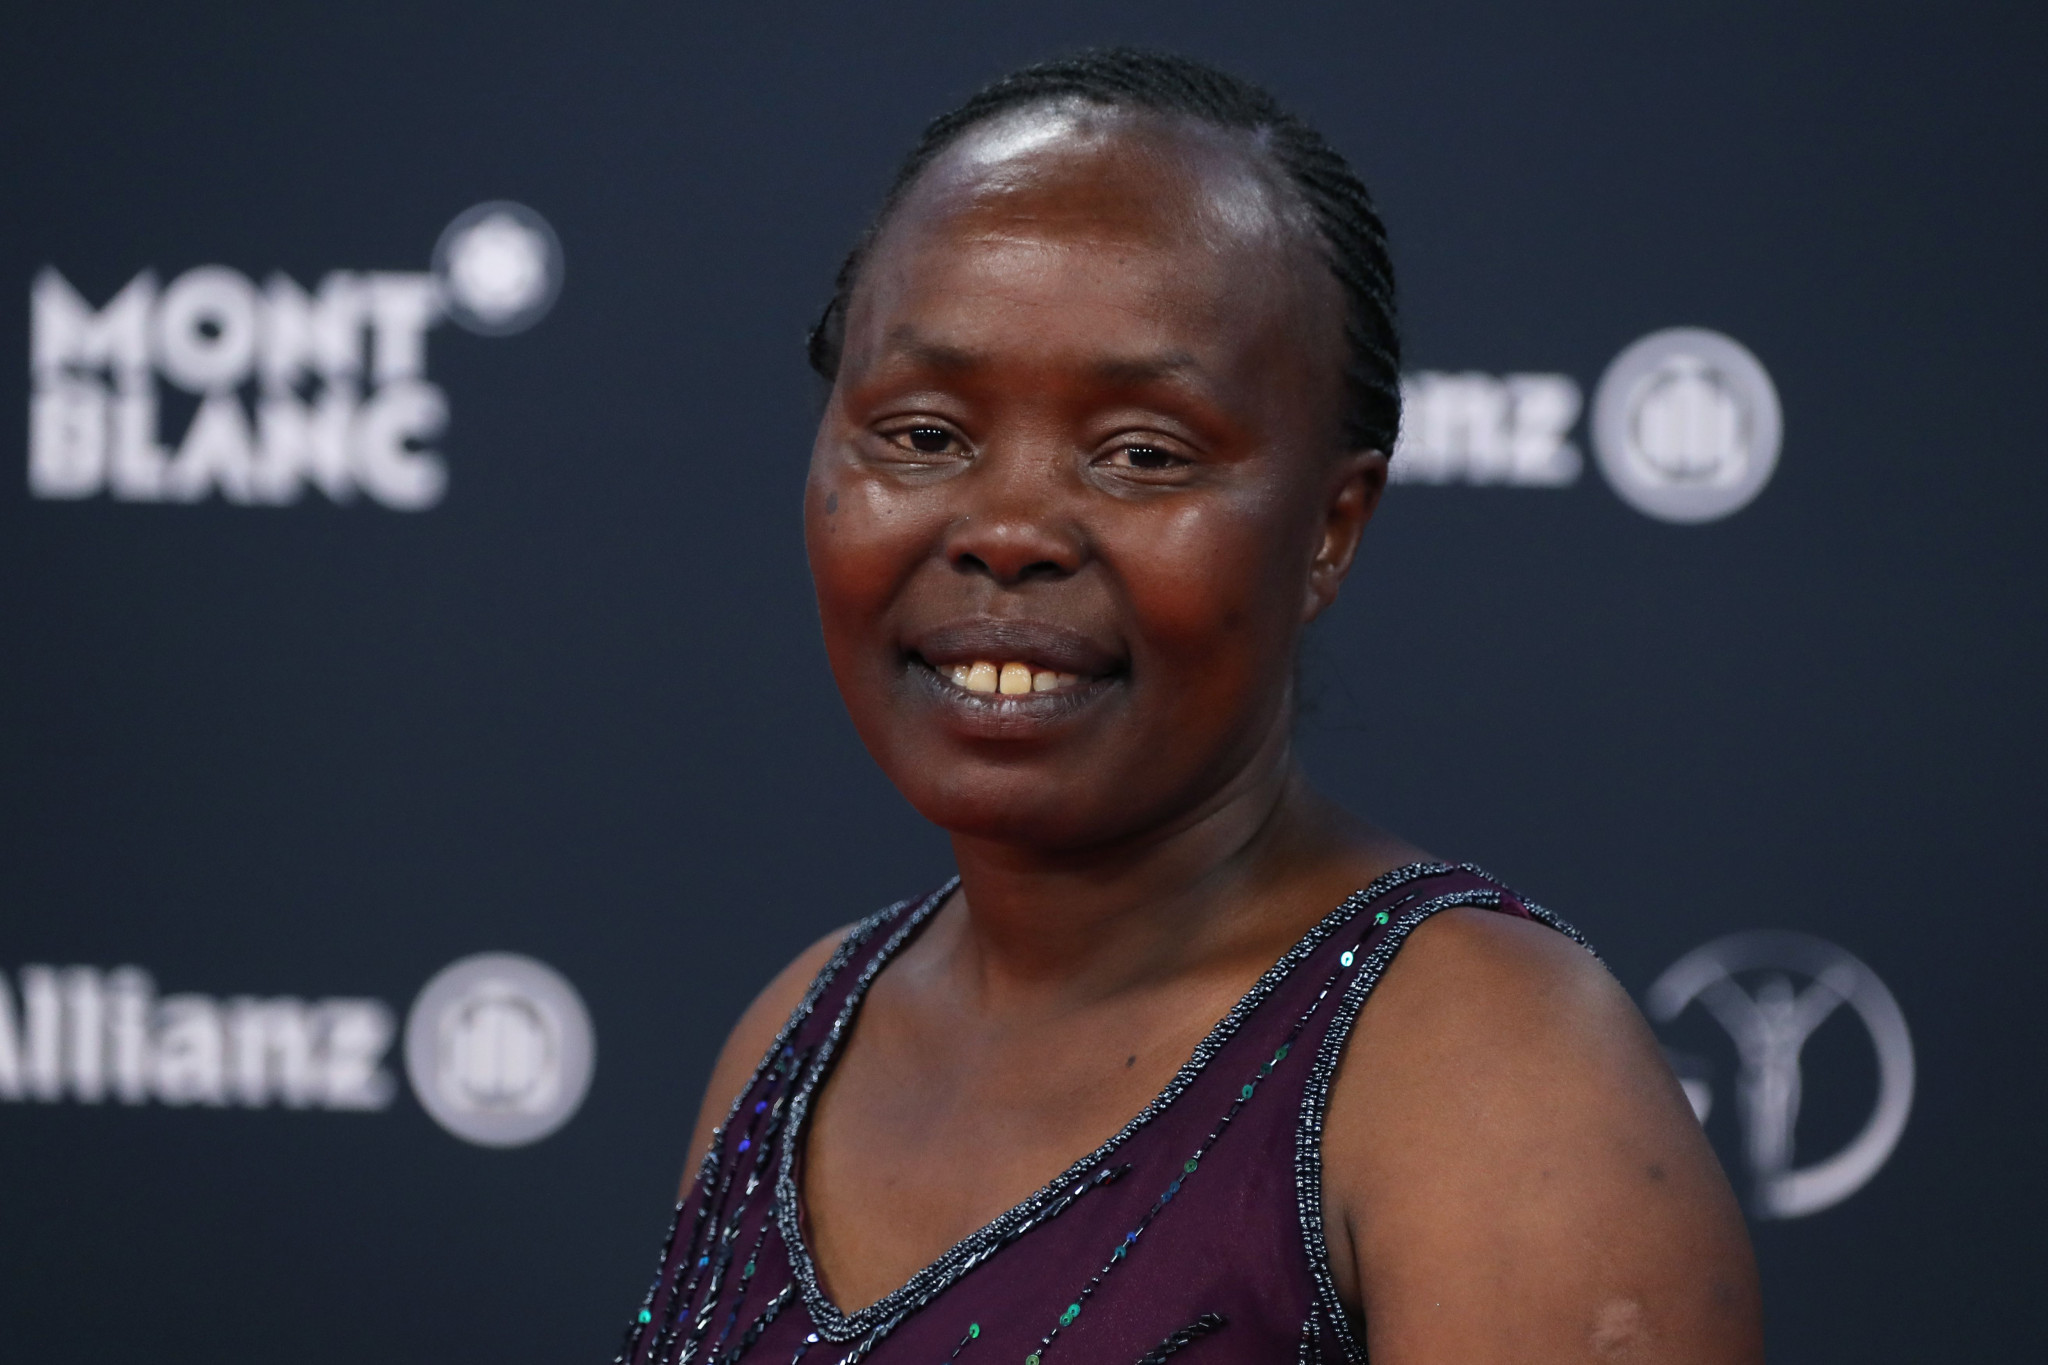 Former marathon world record holder Tegla Loroupe has been working to build sporting facilities in Kenya ©Getty Images